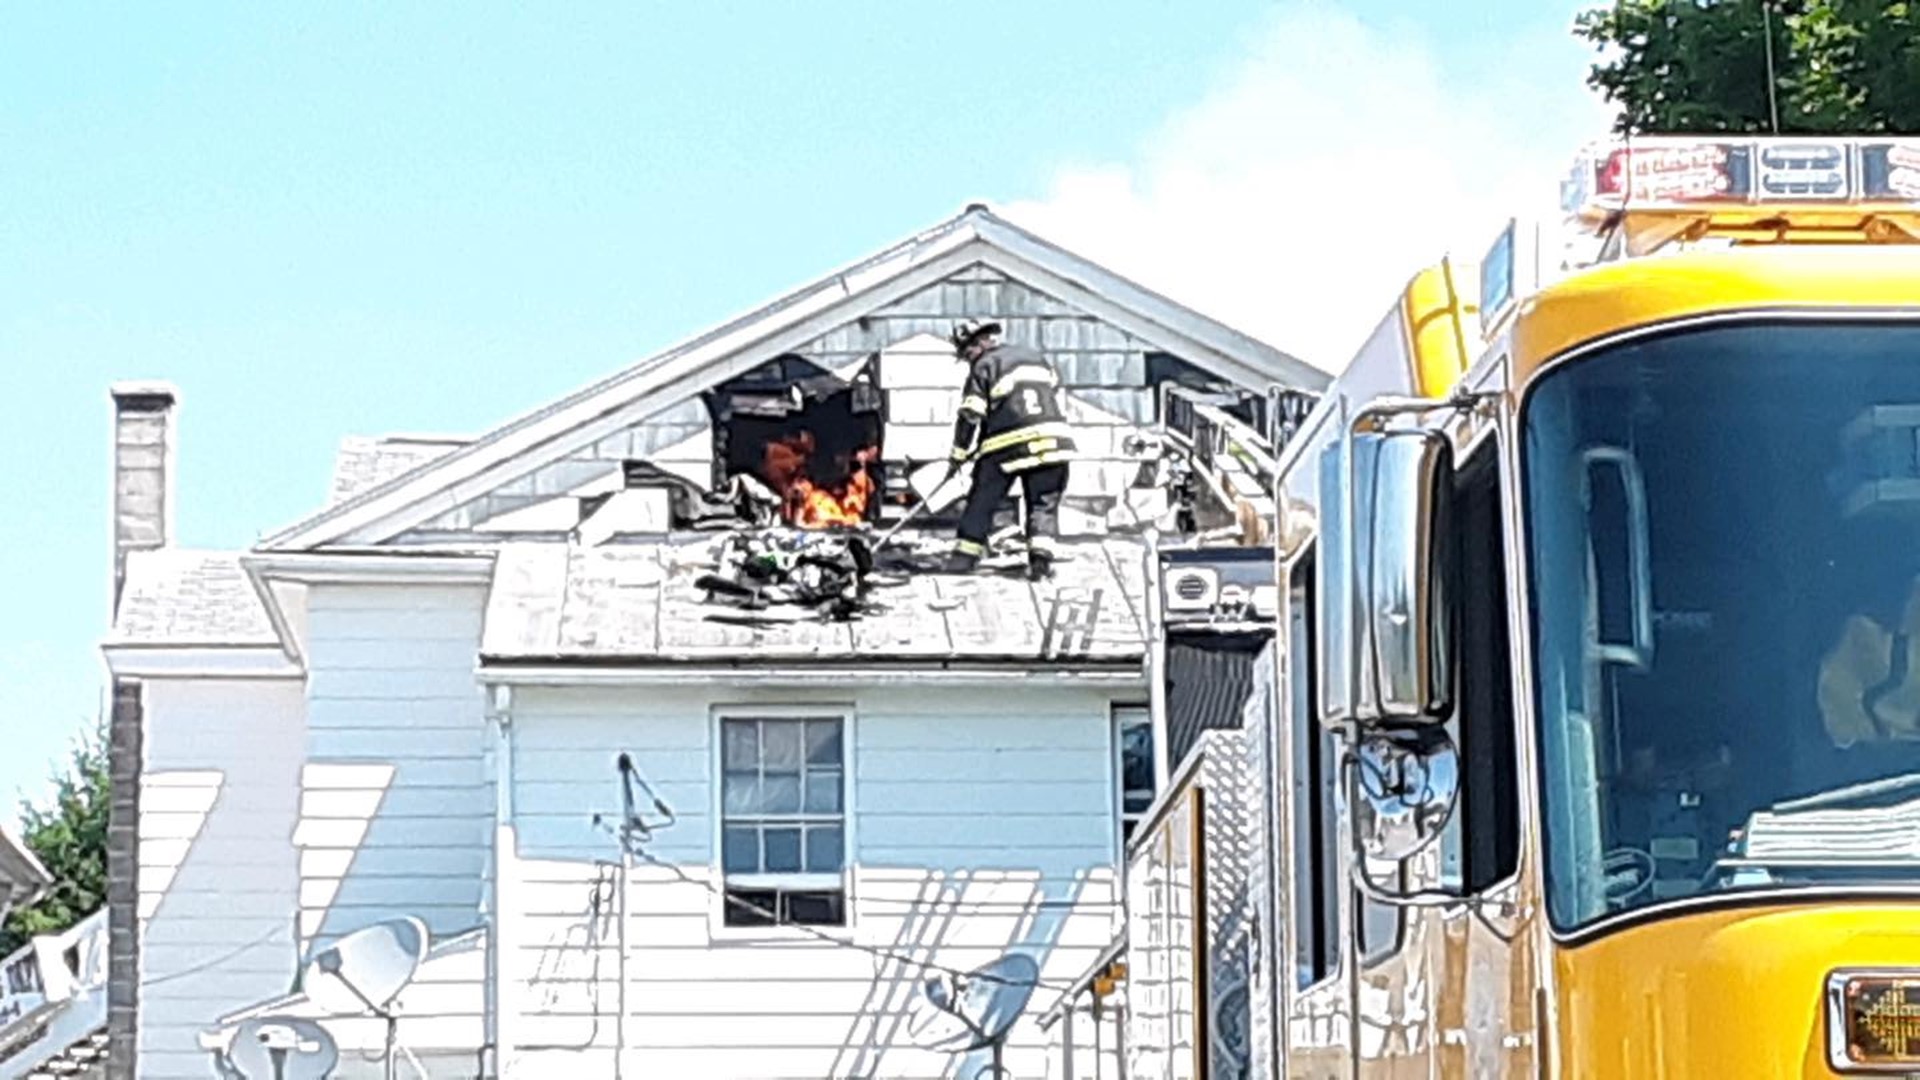 Fire crews responded to the place along Center Street in Milton just before 11 a.m. Sunday morning.